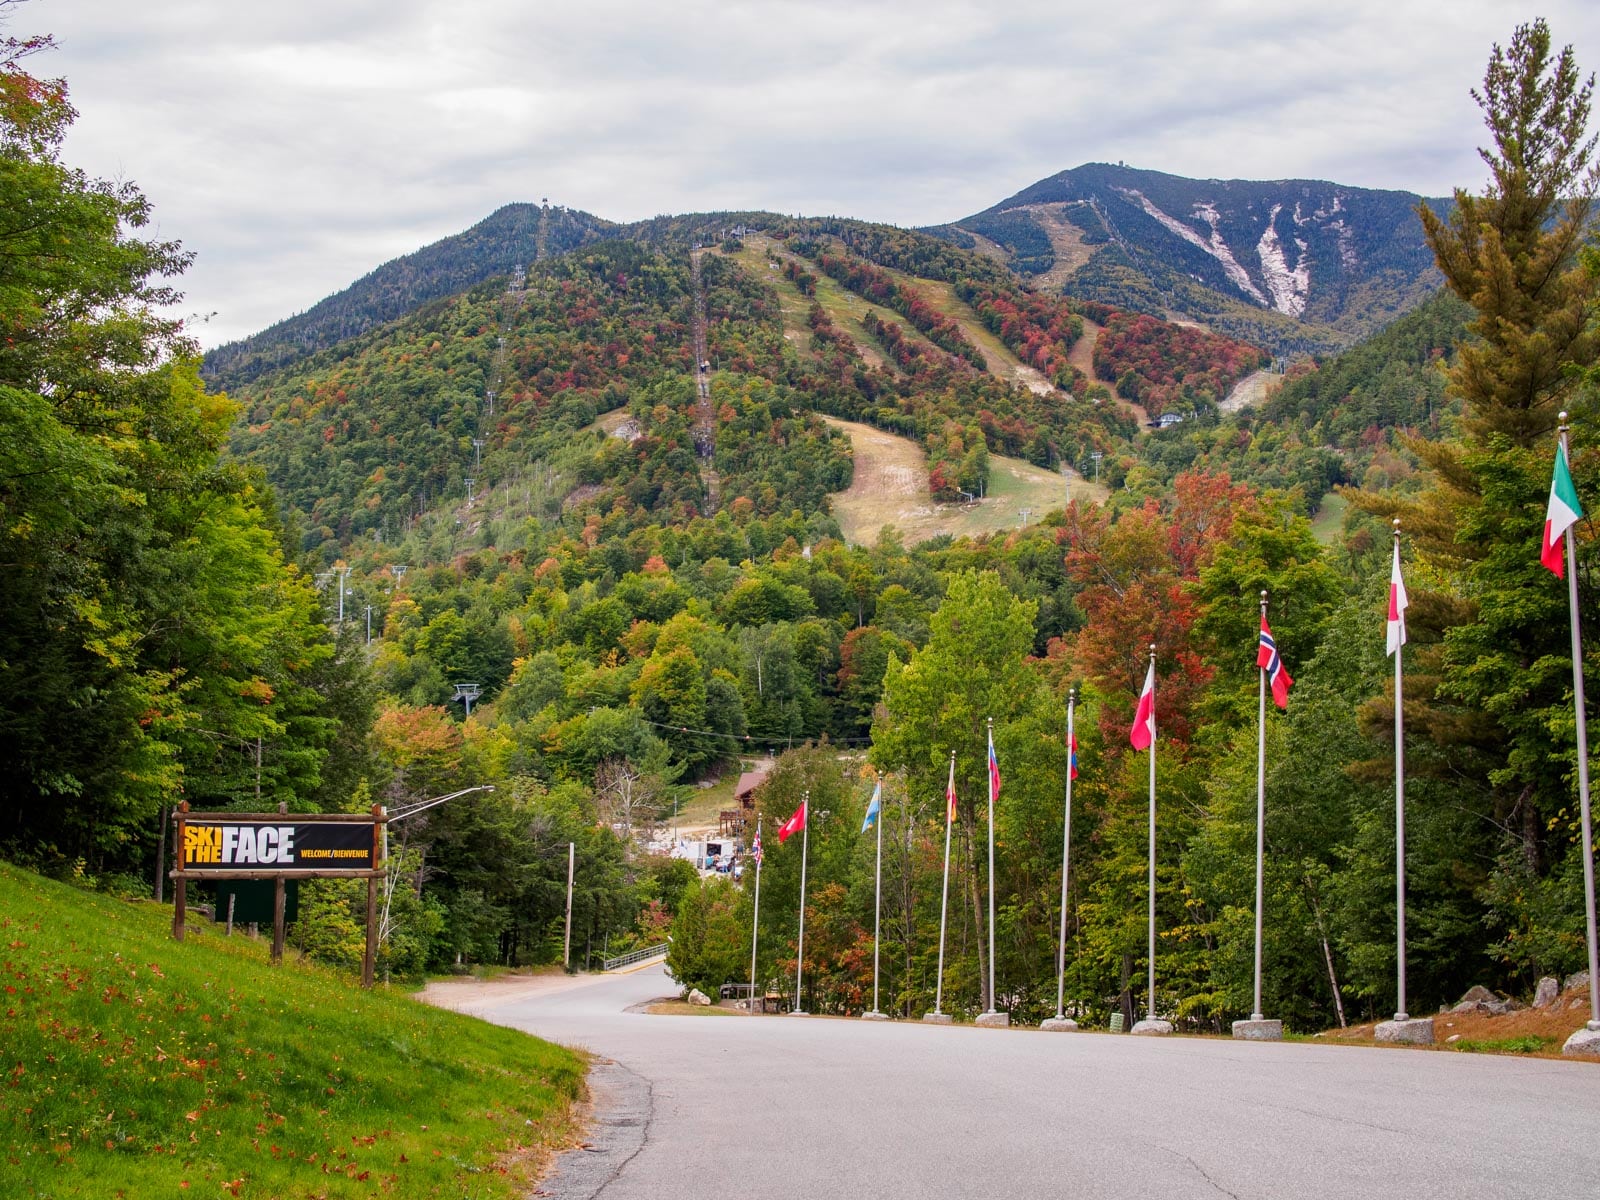 A road leading to a ski resort with flags flying.